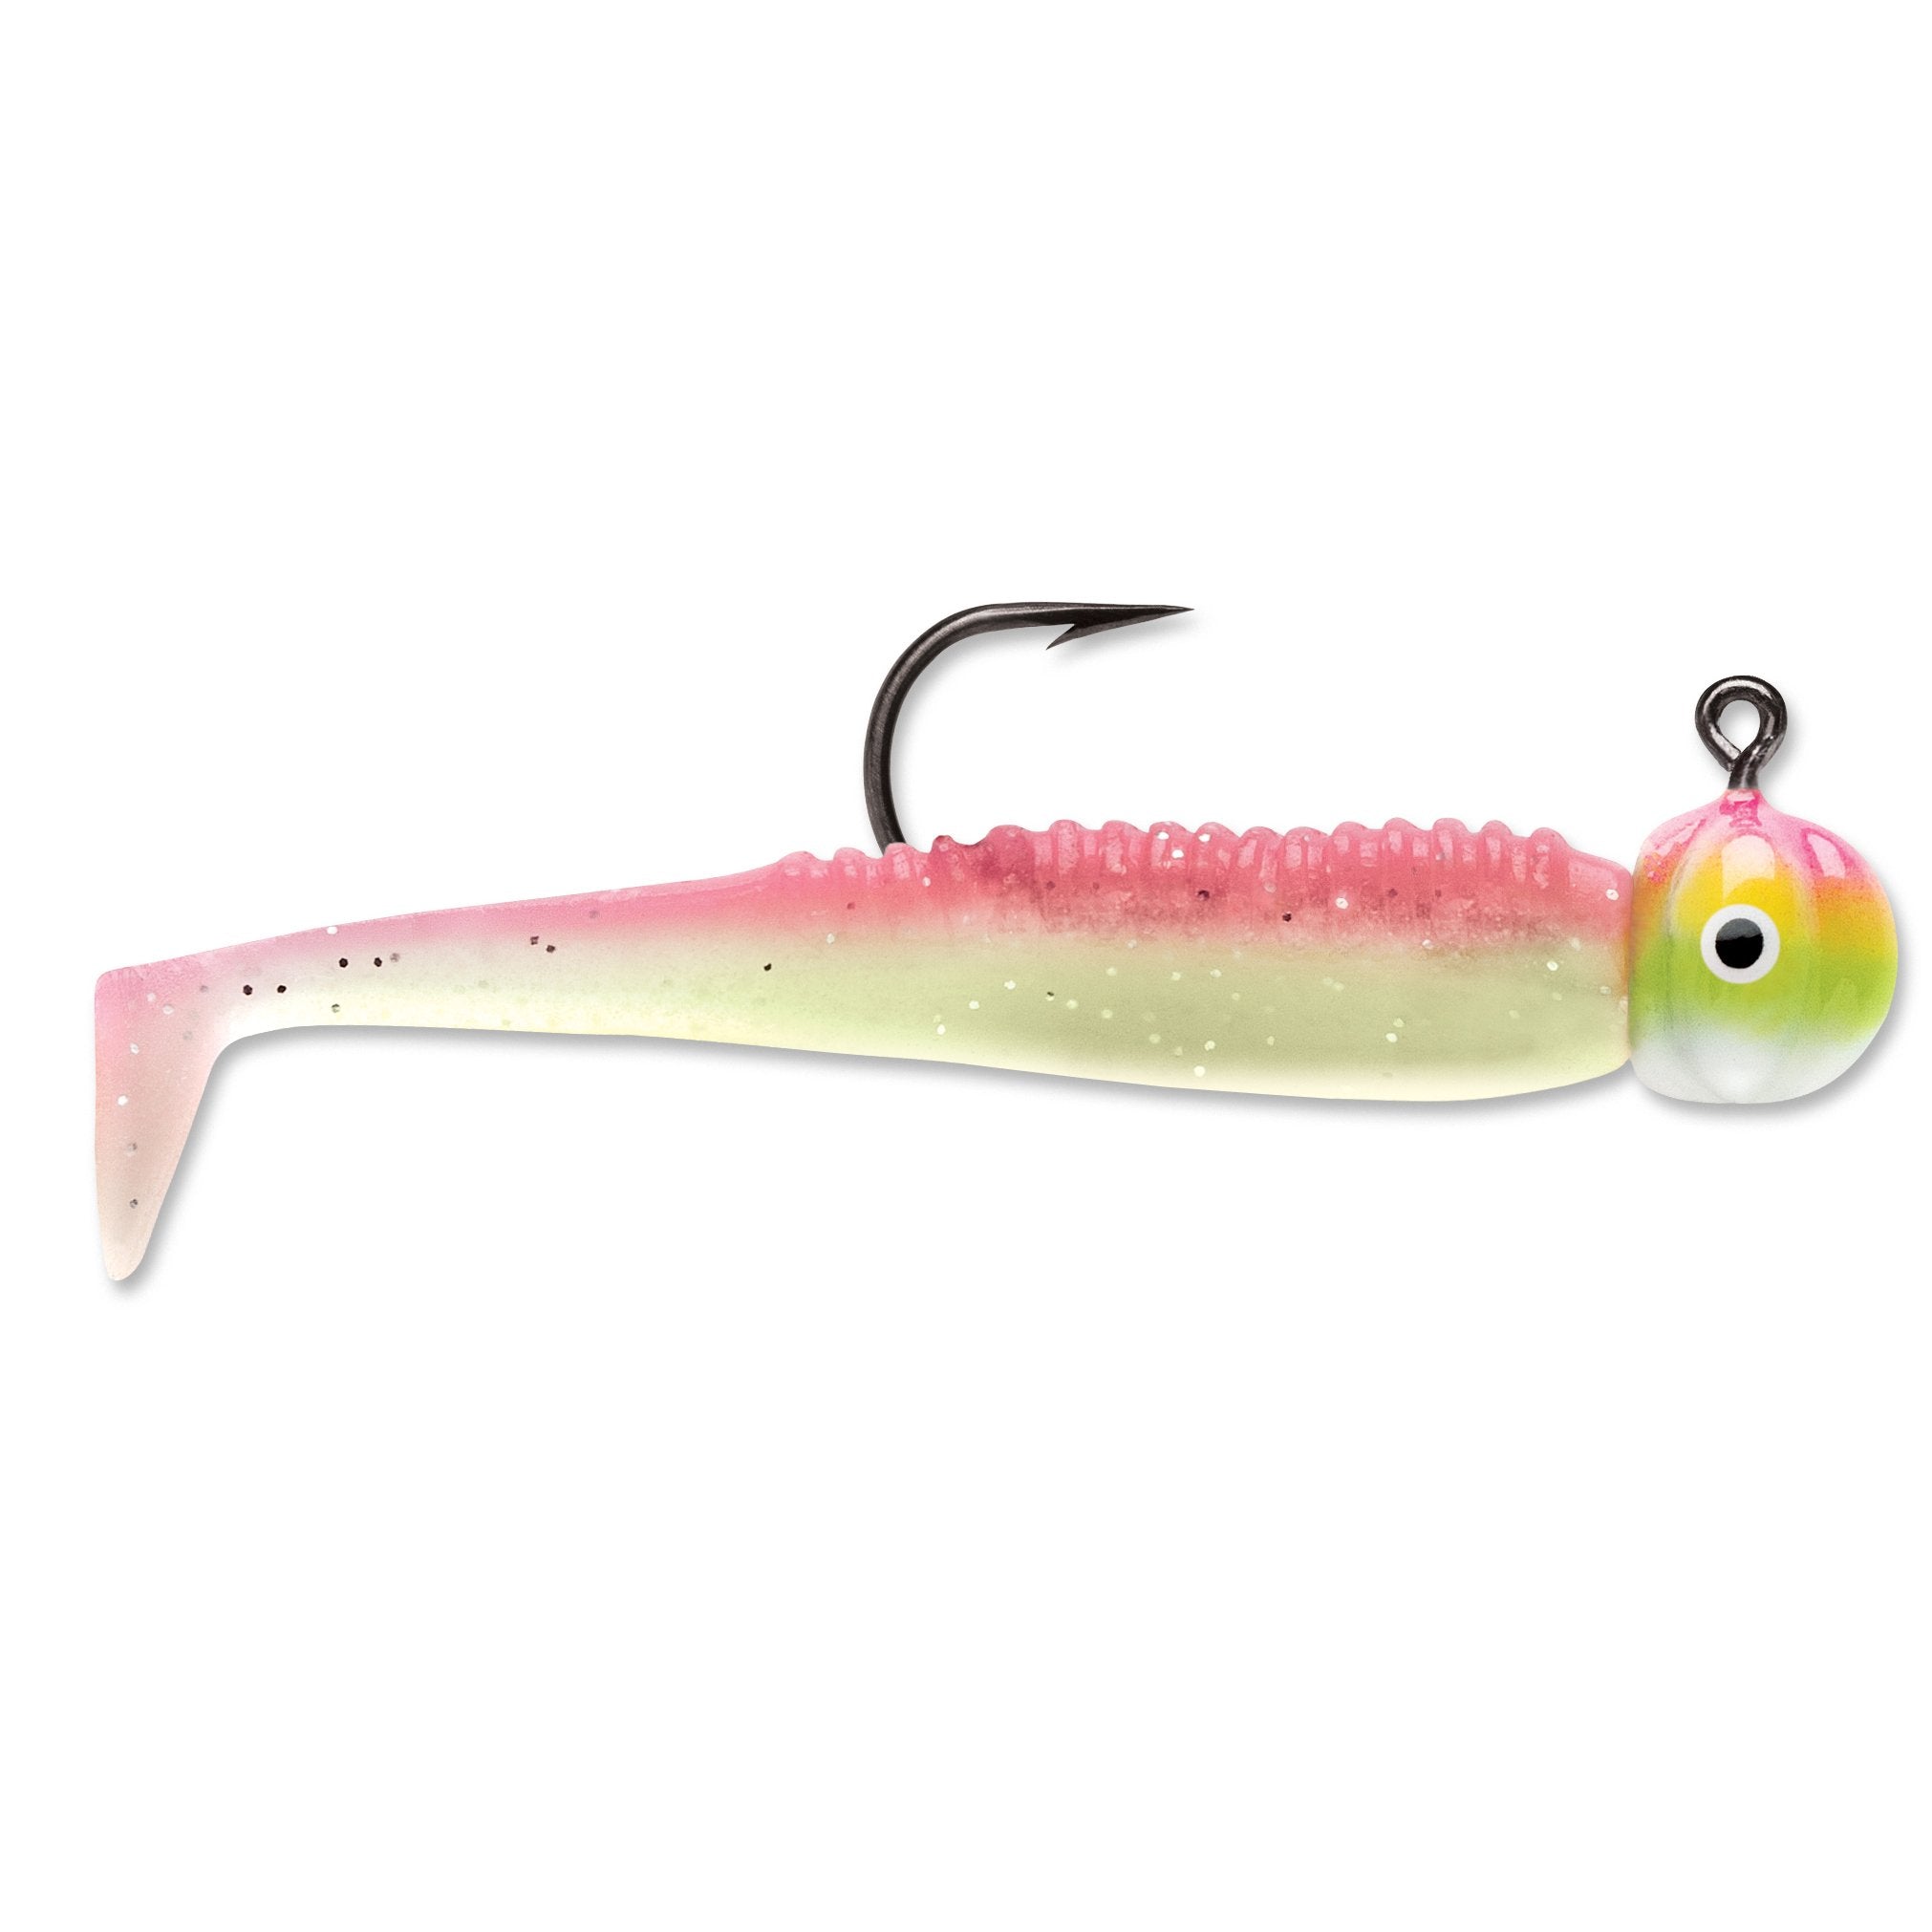 VMC Boot Tail Jig - 1/16 oz / Pink Chartreuse Glow